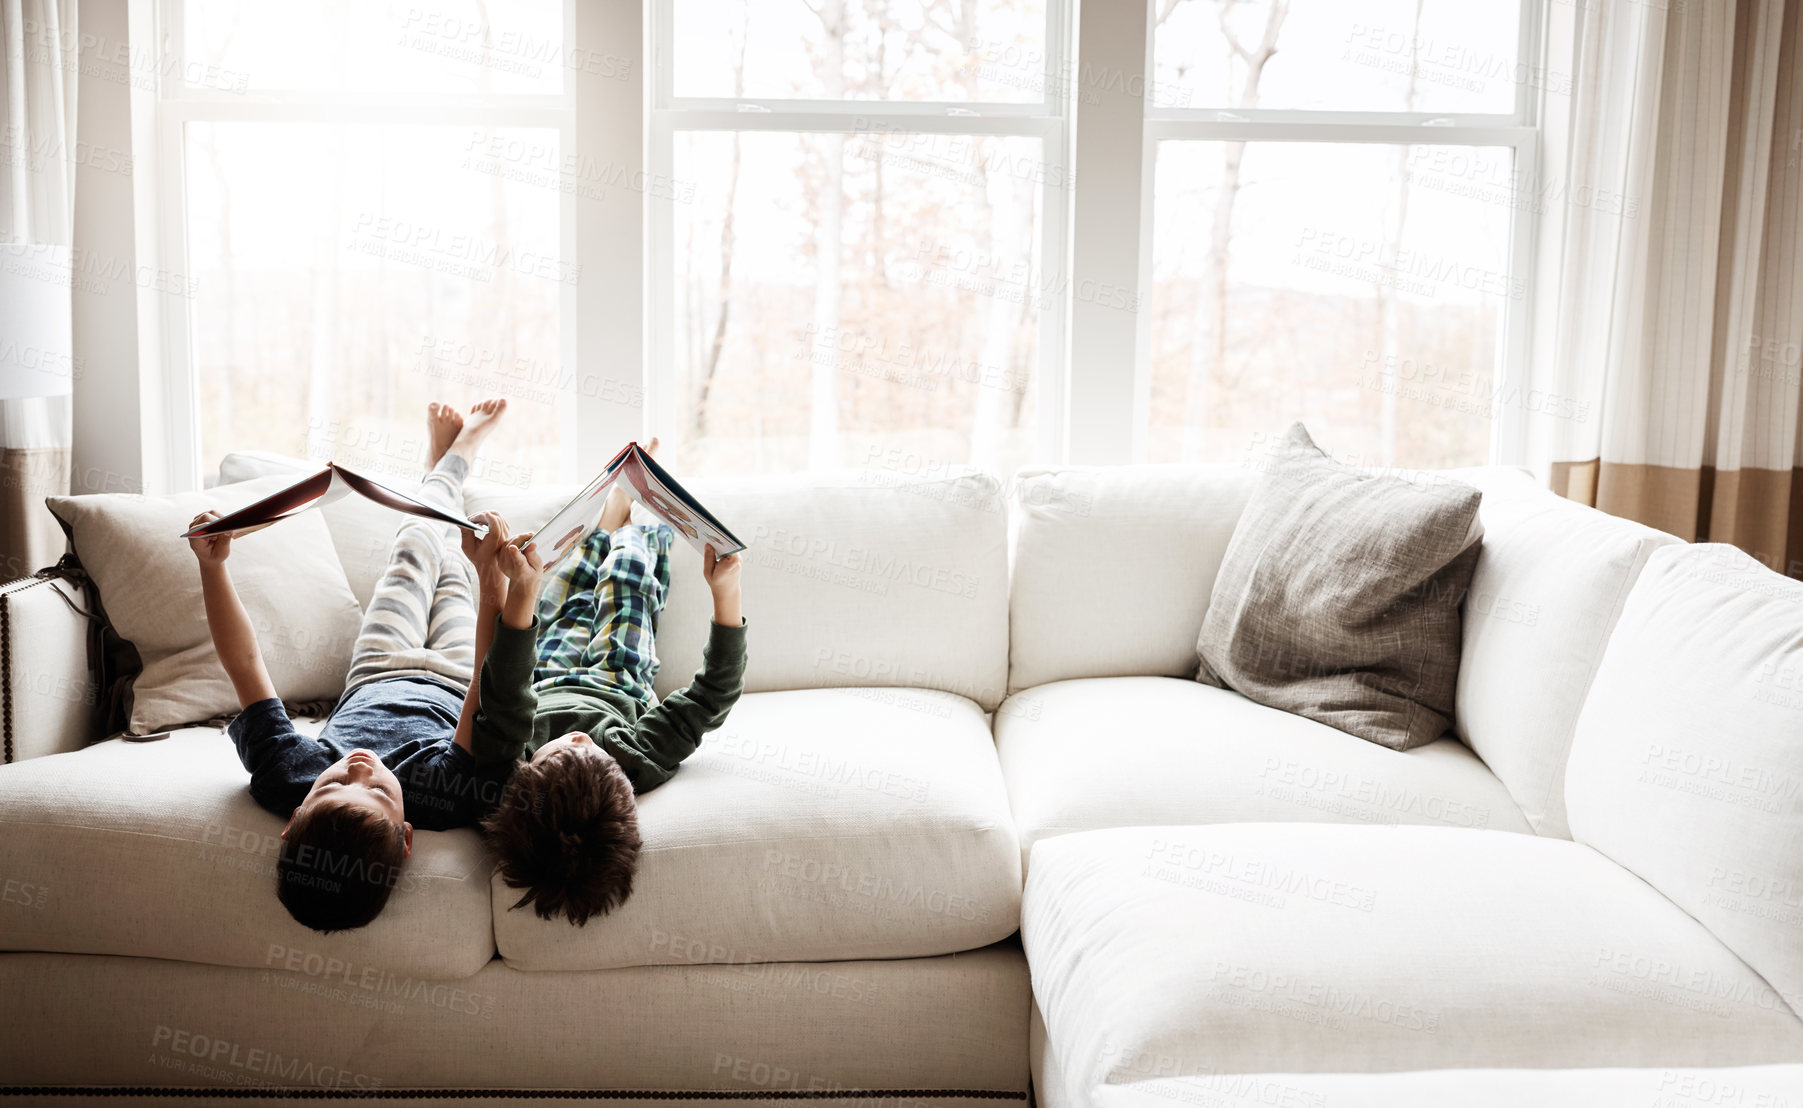 Buy stock photo Fun children, bonding and reading books in education, learning or relax studying upside down on house living room or sofa. kids, storytelling and fantasy fairytale novel in creative home inspiration